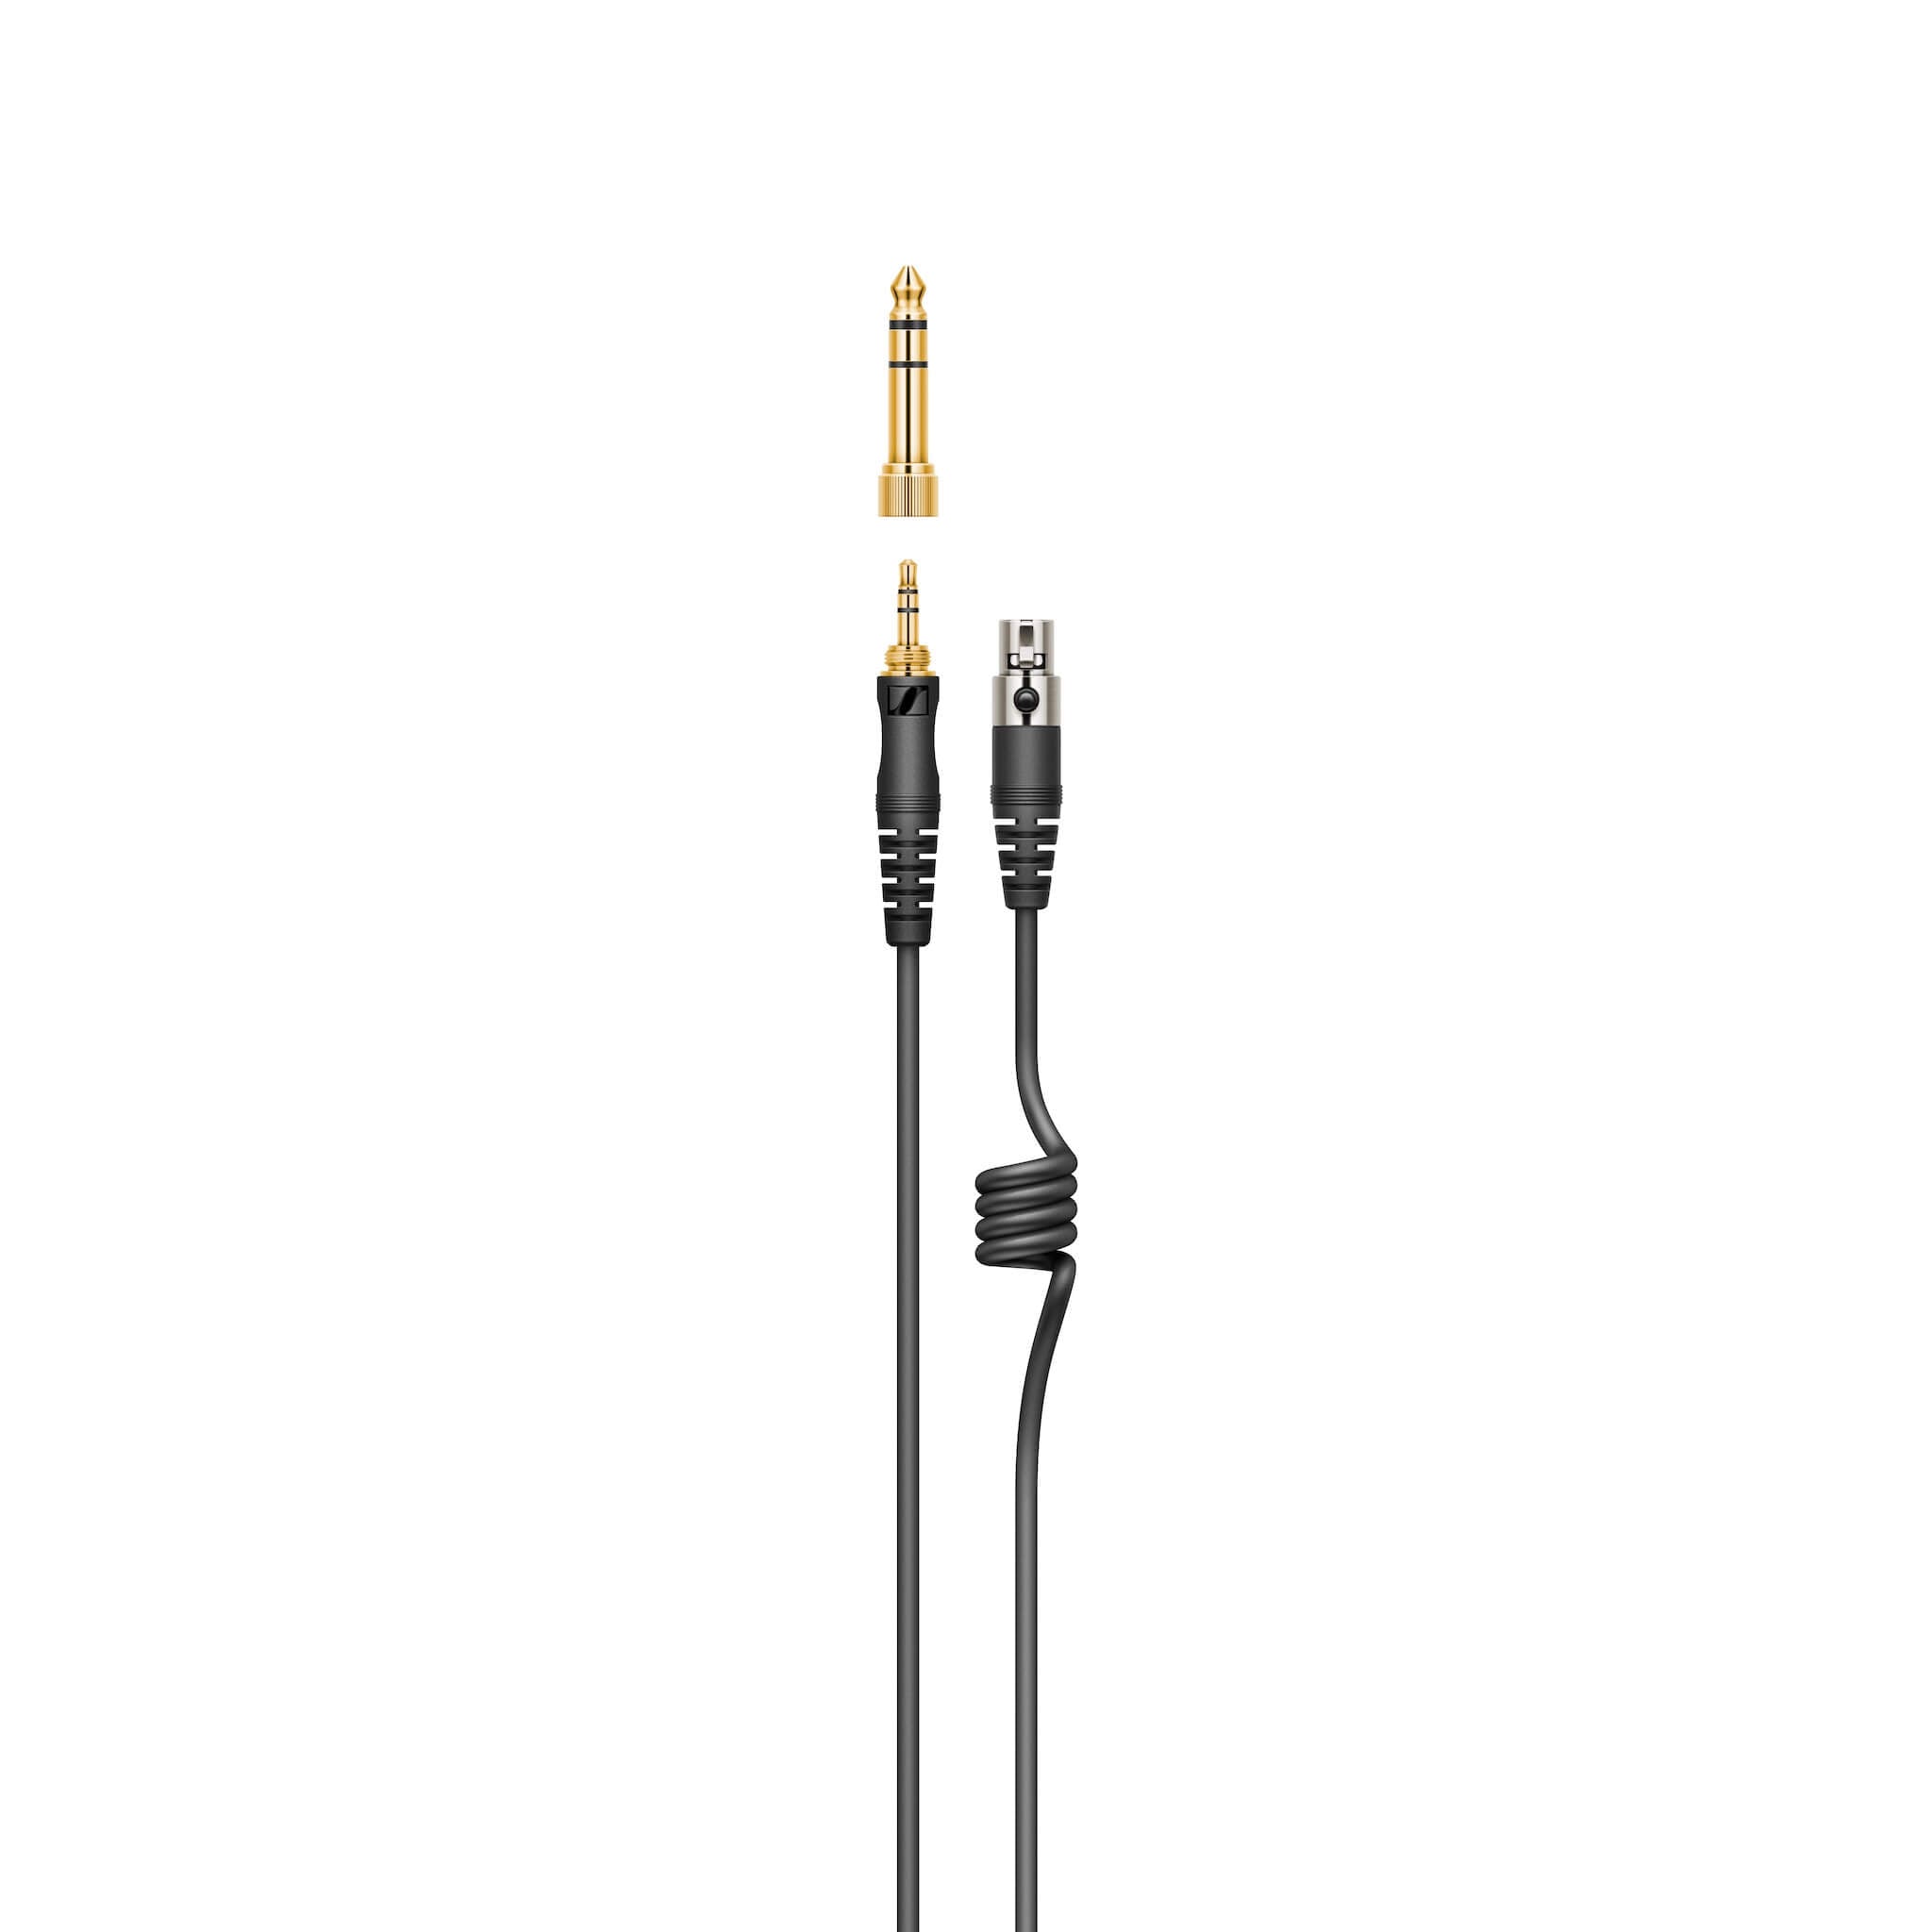 Sennheiser HD 490 PRO Plus - Professional Studio Reference Headphones, cable with adapter